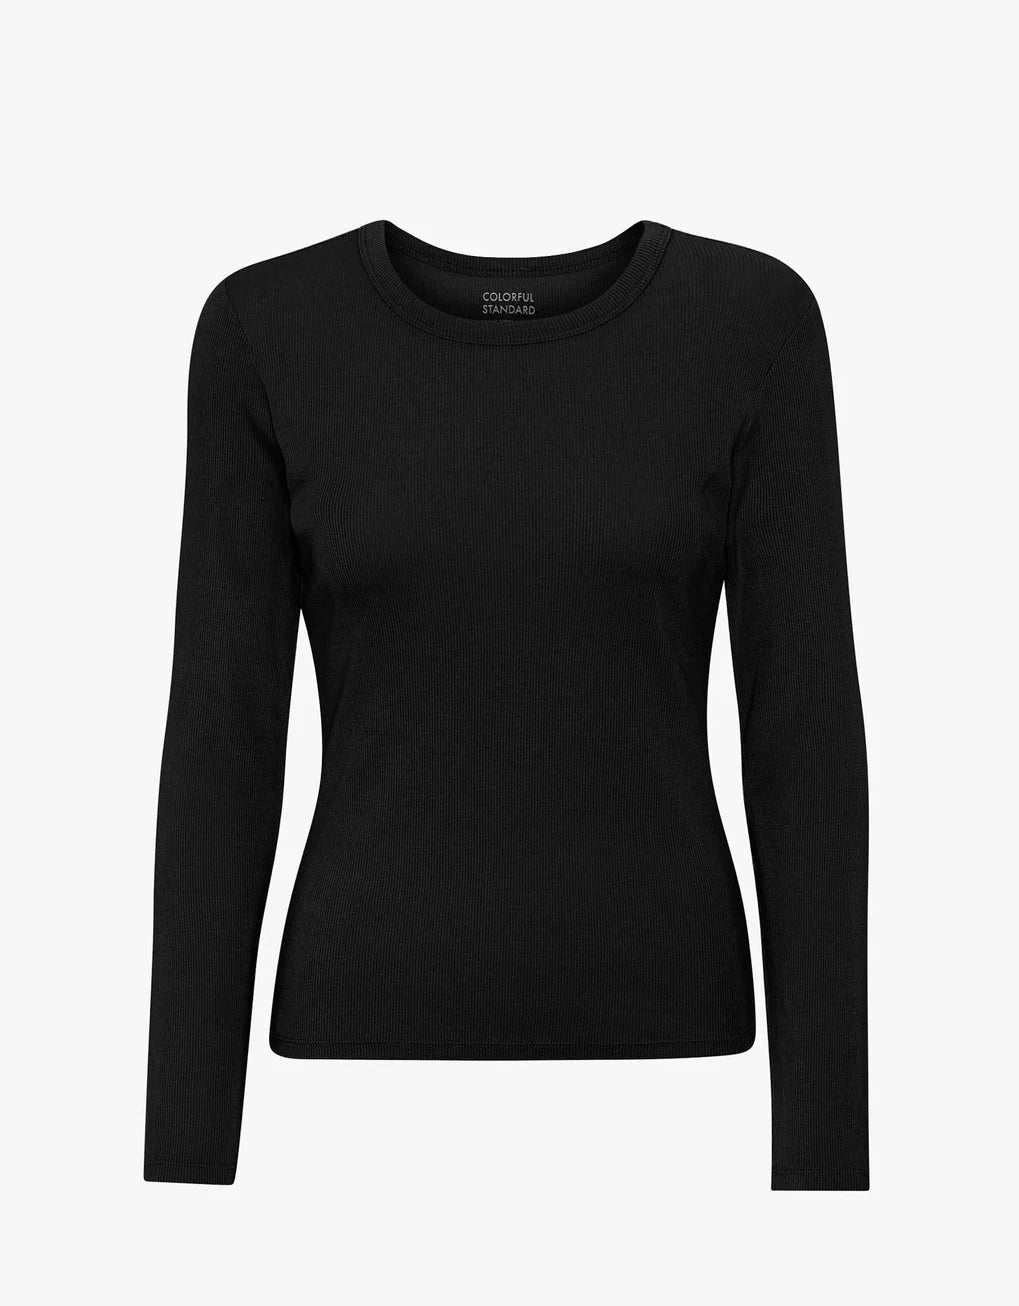 An Colorful Standard Organic Rib LS T-Shirt, long-sleeved black top with elastane for women.